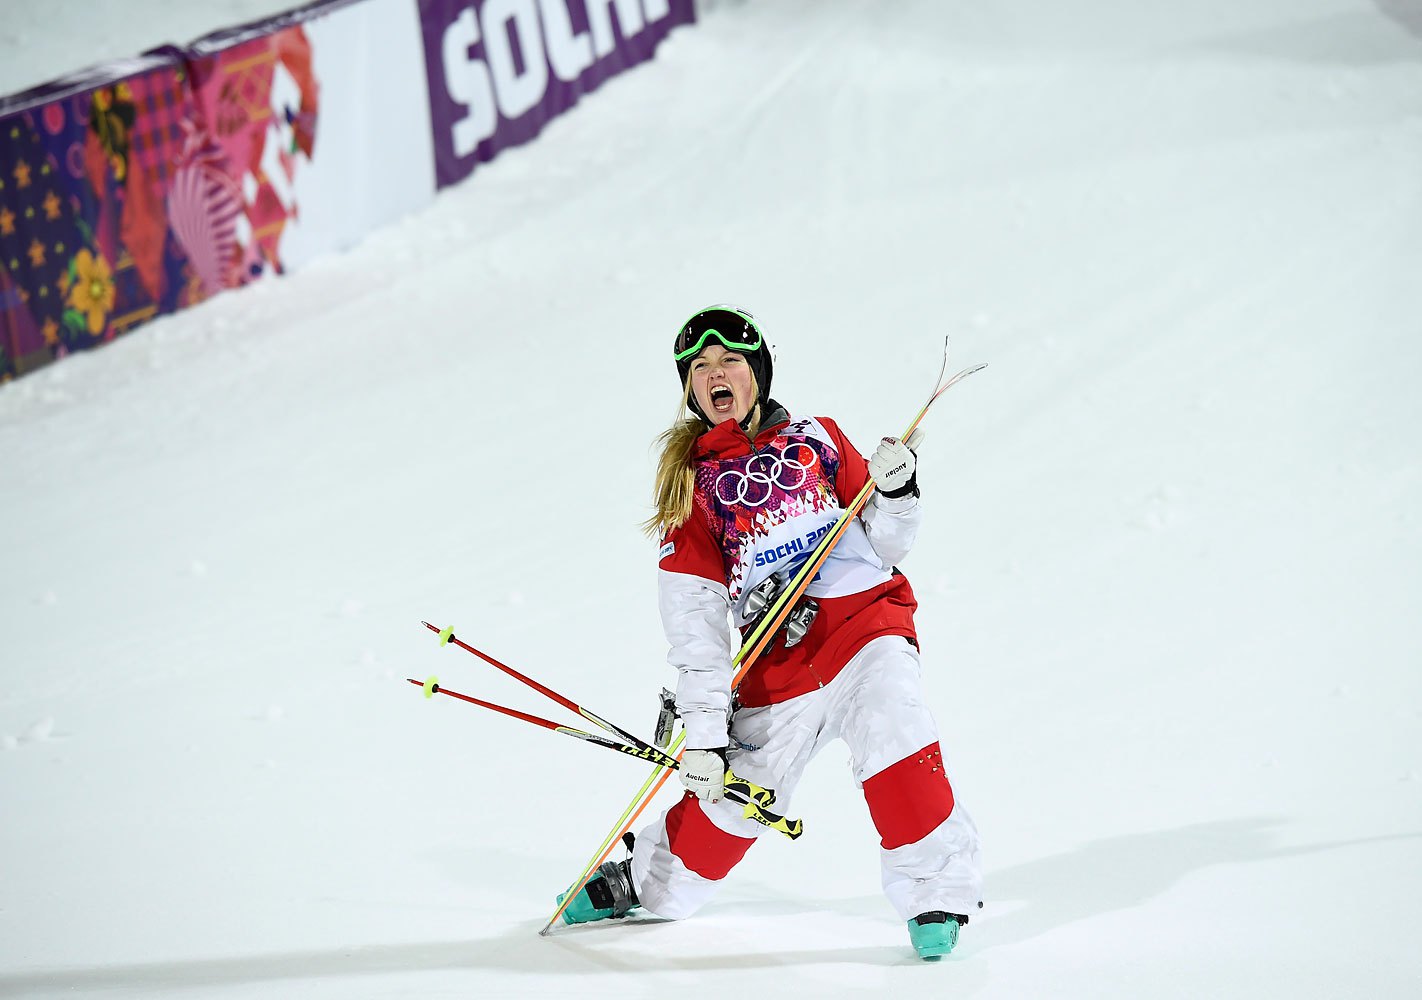 Canada's Justine Dufour-Lapointe celebrates after winning the women's freestyle skiing moguls final competition, Feb. 8, 2014.